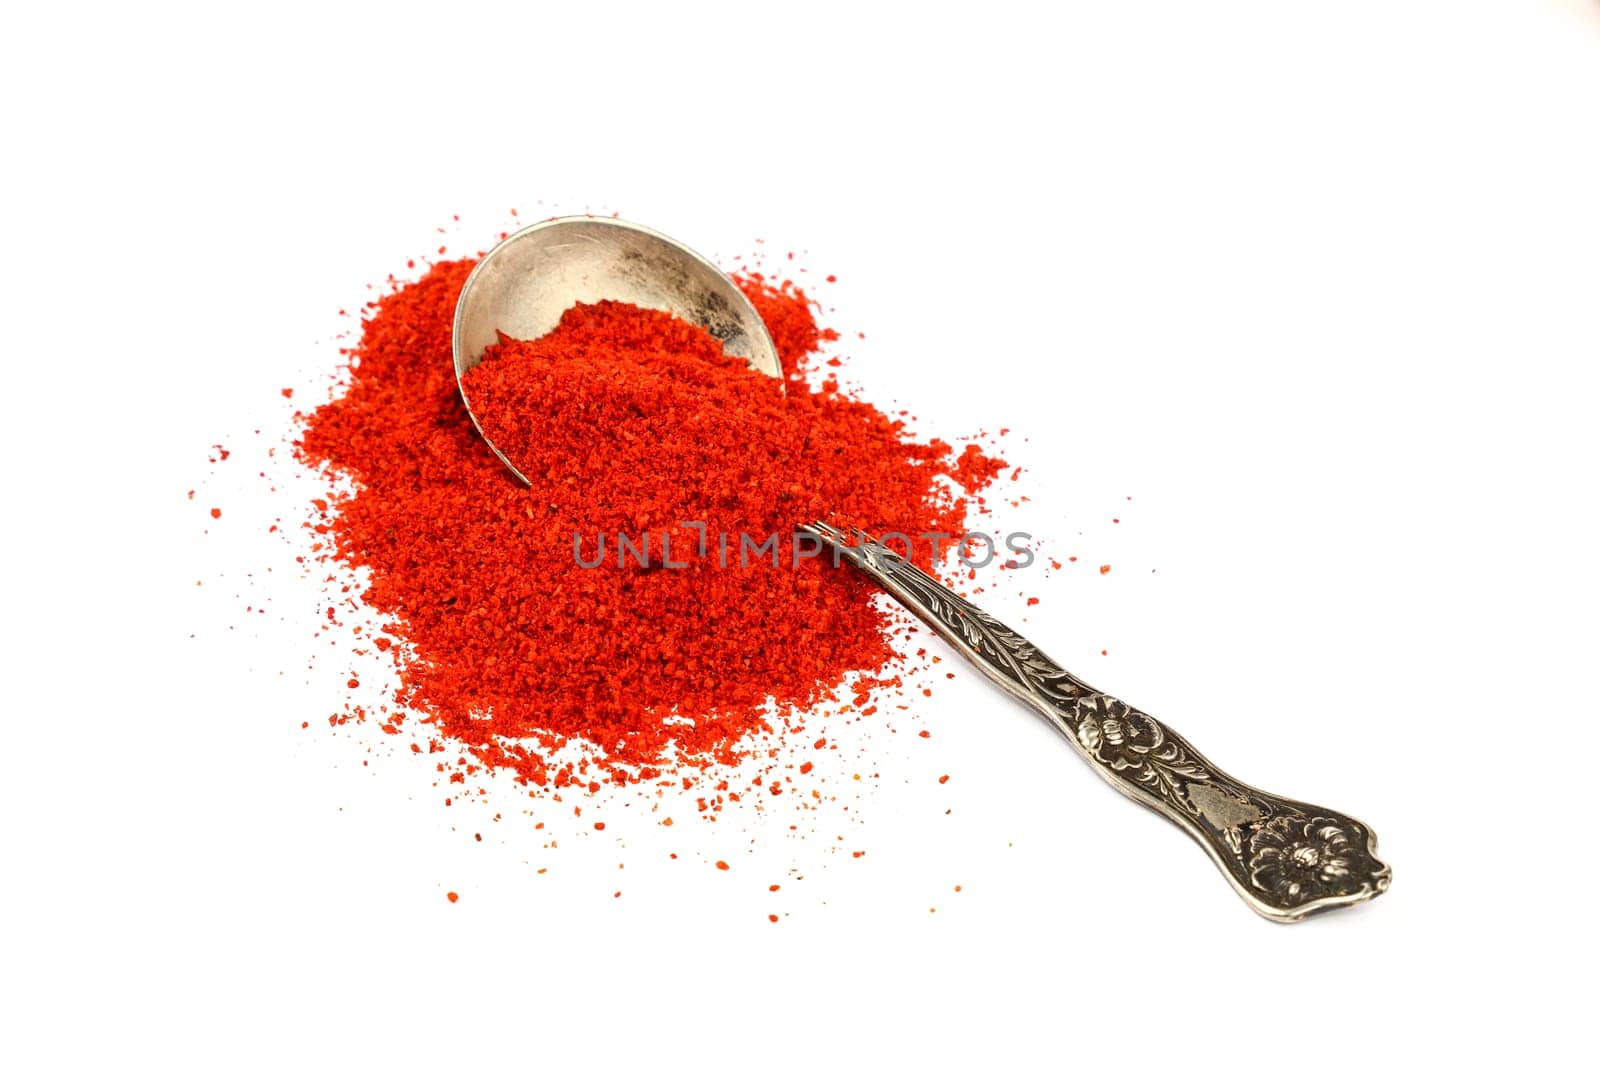 Metal spoon full of red hot chili pepper by BreakingTheWalls